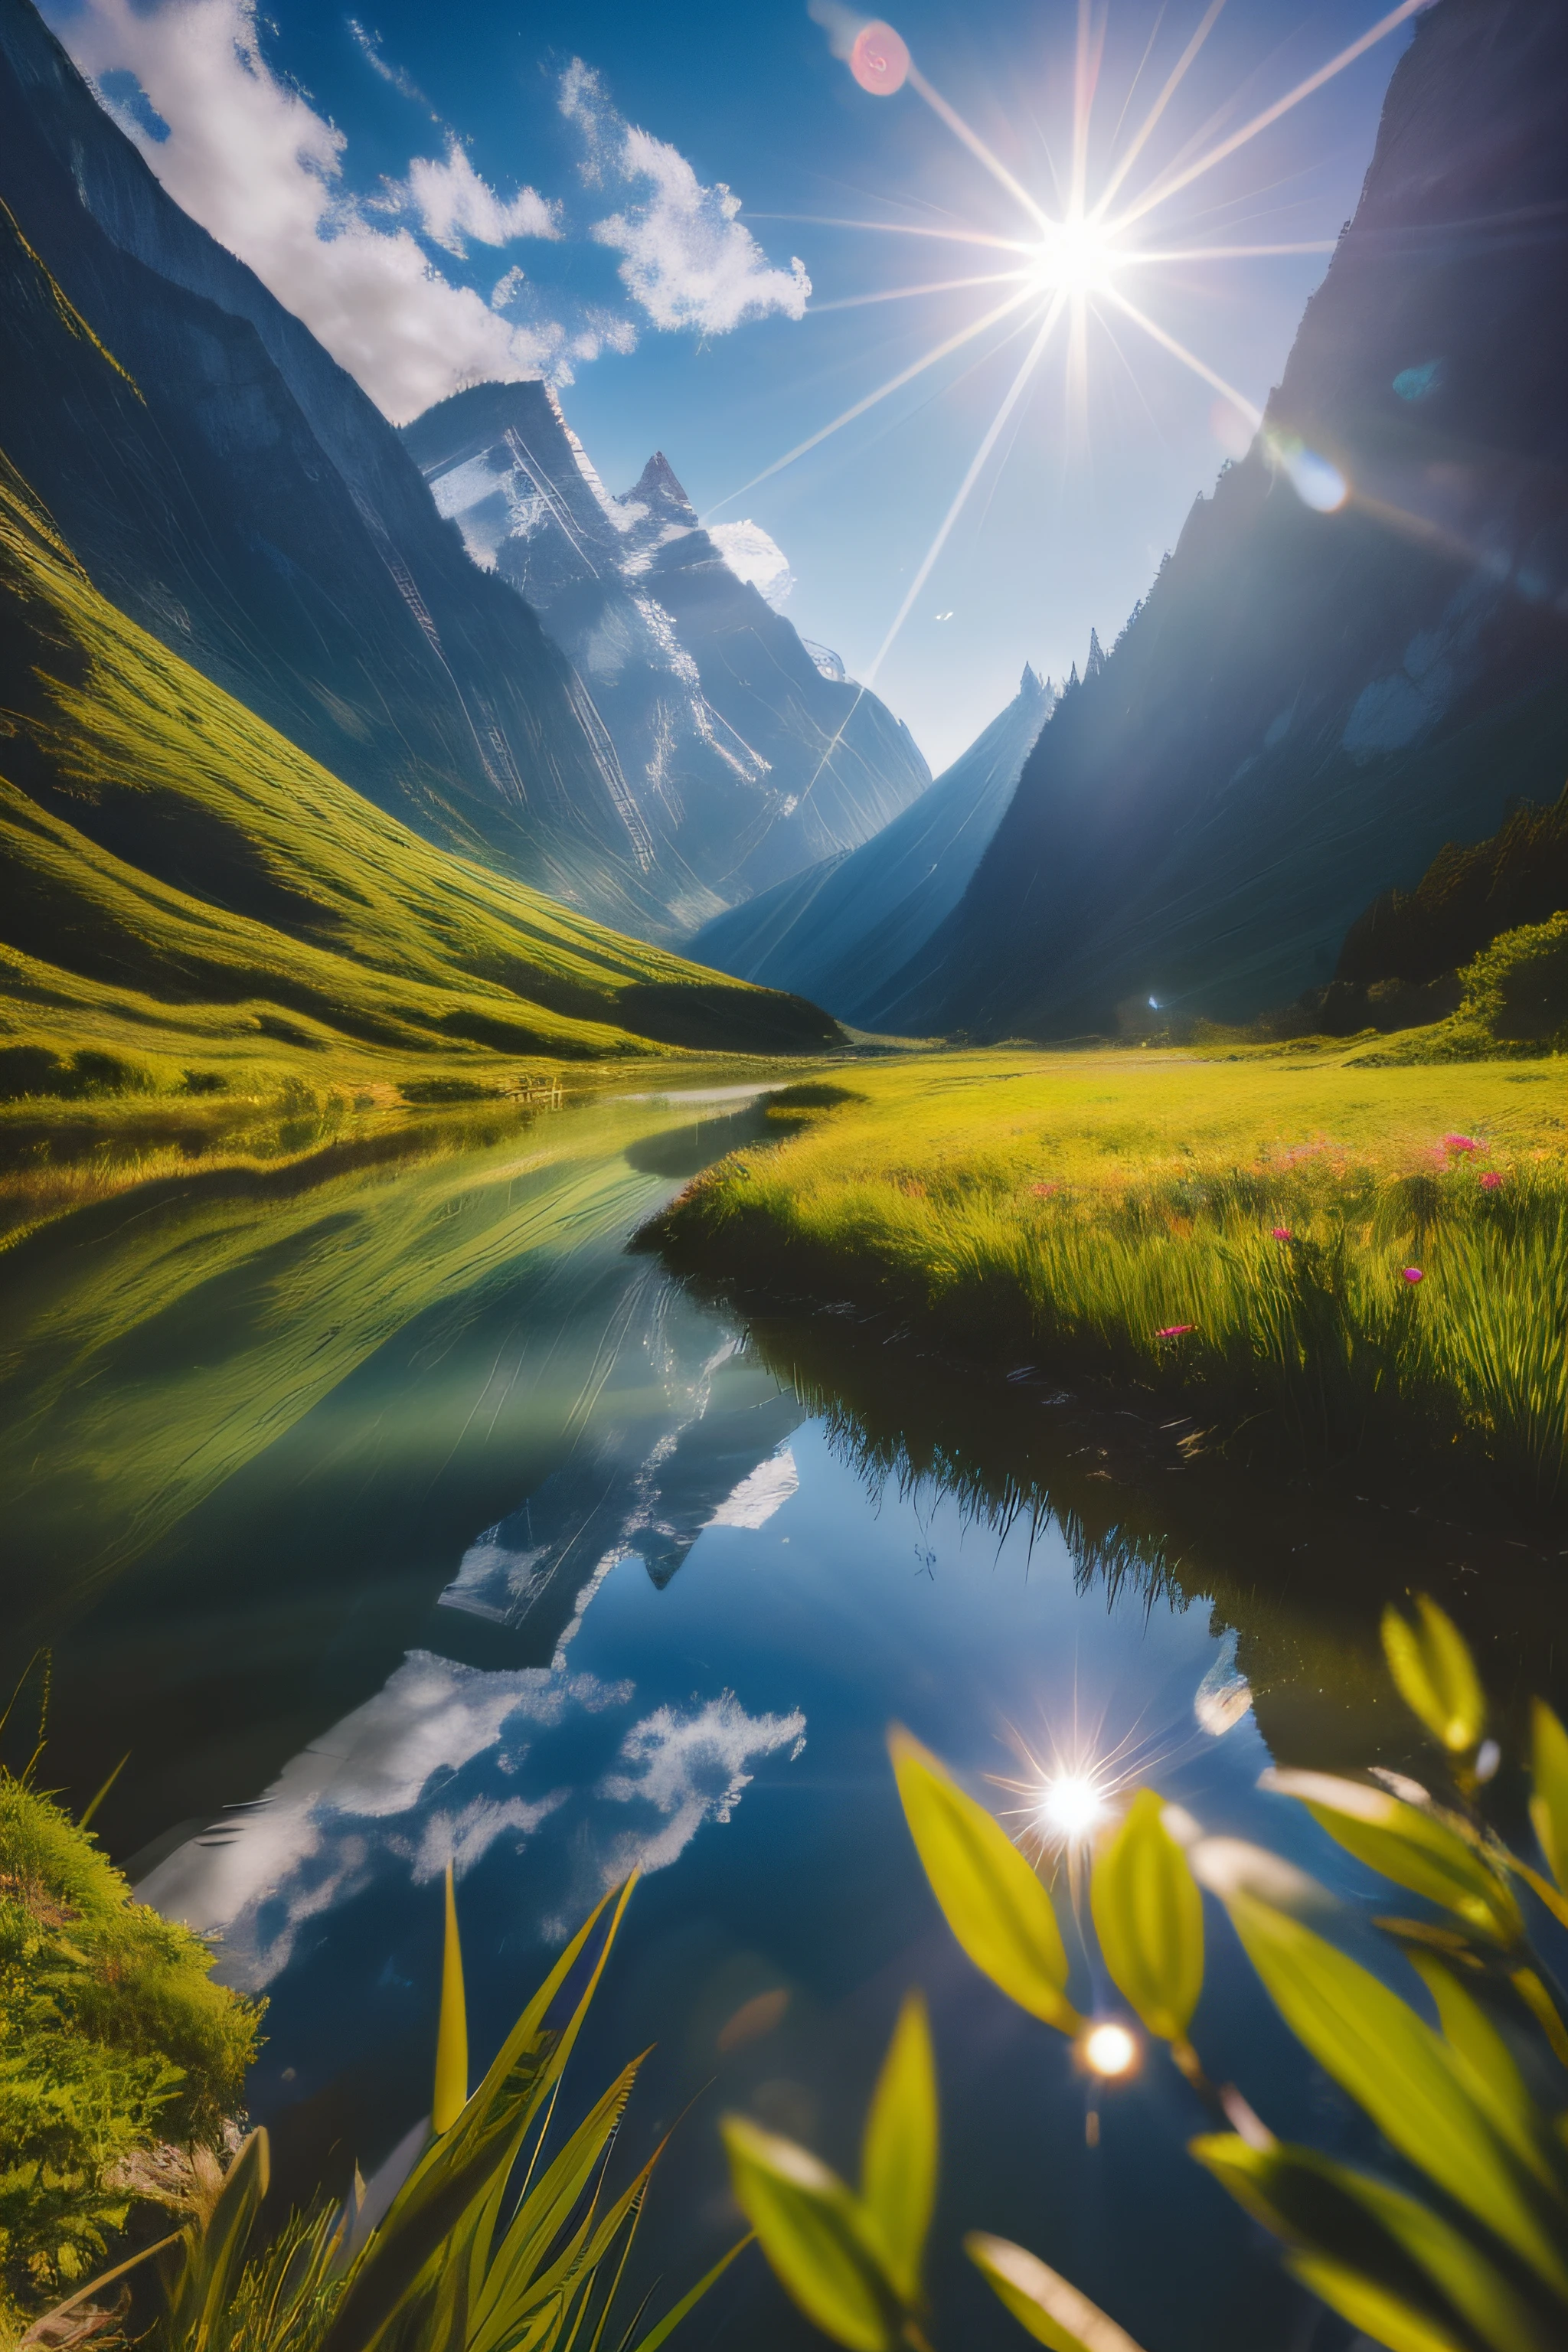 "Highly detailed RAW color Photo, Rear Angle, a stunning high-resolution landscape with majestic clouds towering overhead, accompanied by a mesmerizing lens flare, (mountains:1.1), (lush green vegetation),  (highly detailed, hyperdetailed, intricate), (lens flare:0.7), (bloom:0.7), particle effects, raytracing, cinematic lighting, shallow depth of field, photographed on a Sony a9 II, 50mm wide angle lens, sharp focus."